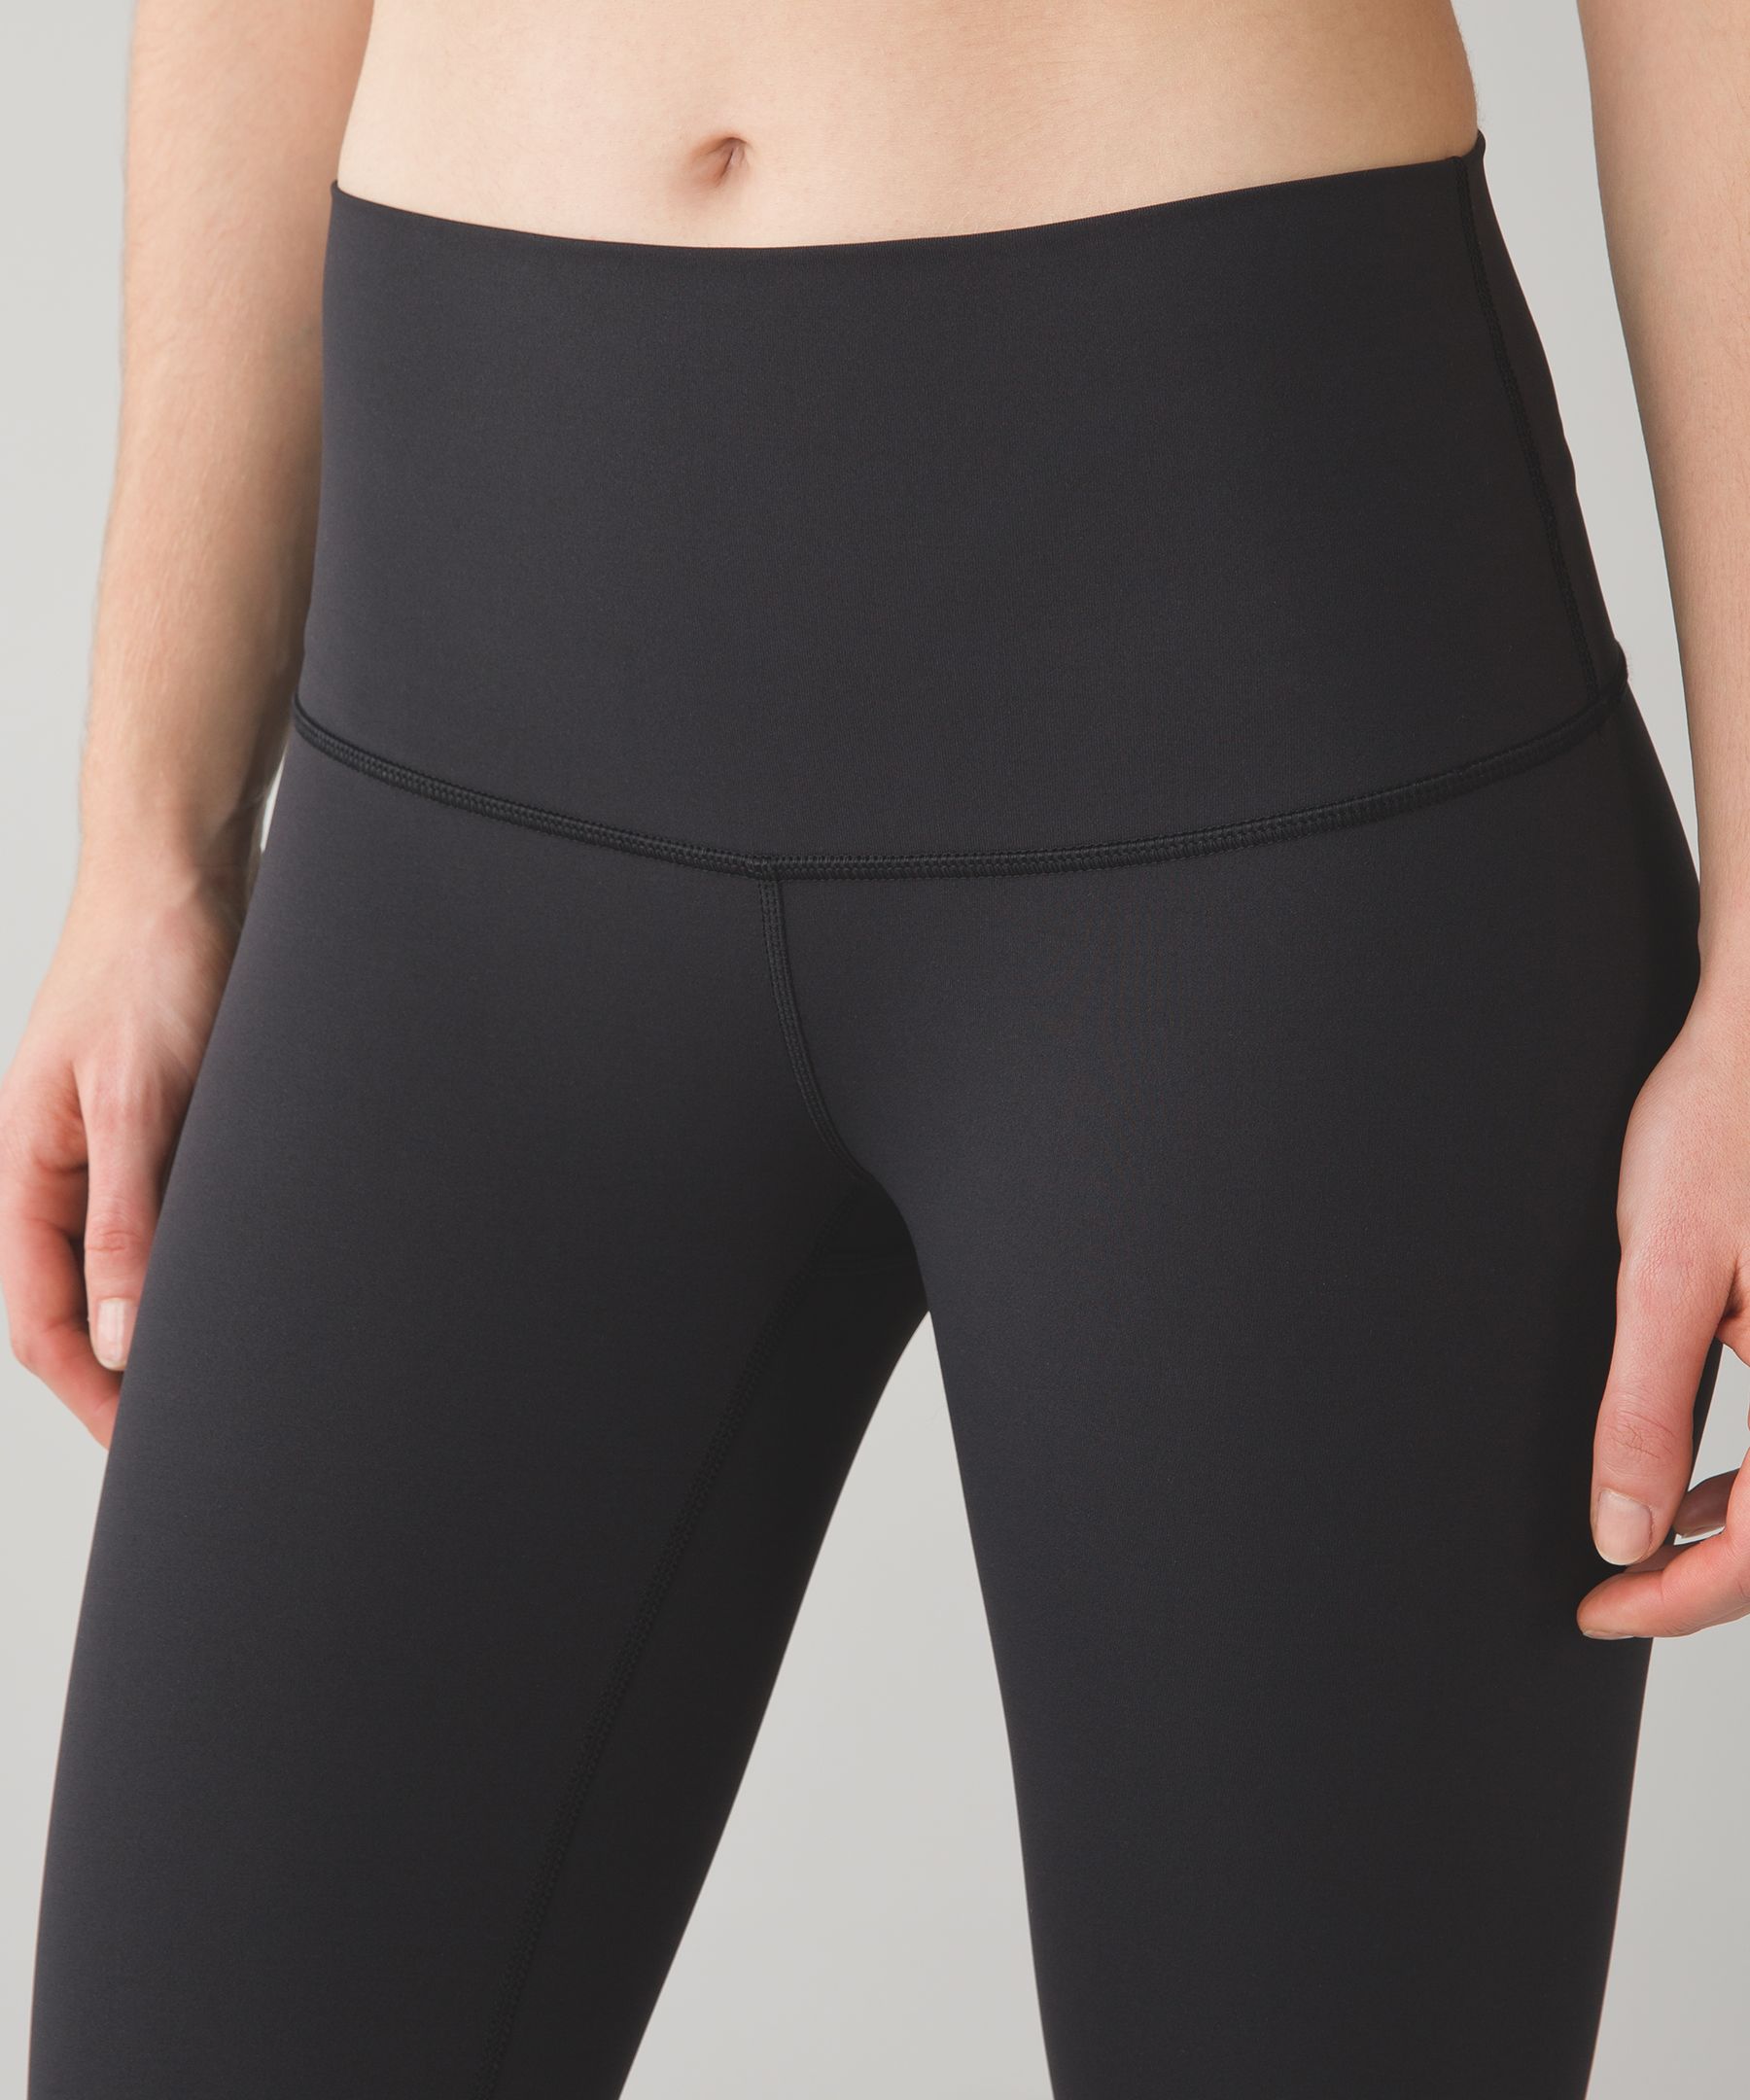 Lululemon - Wunder Under Crop (Hi-Rise) *21 Luon Knit Heathered Black  Leggings Size 10 - $47 (46% Off Retail) - From Abbey